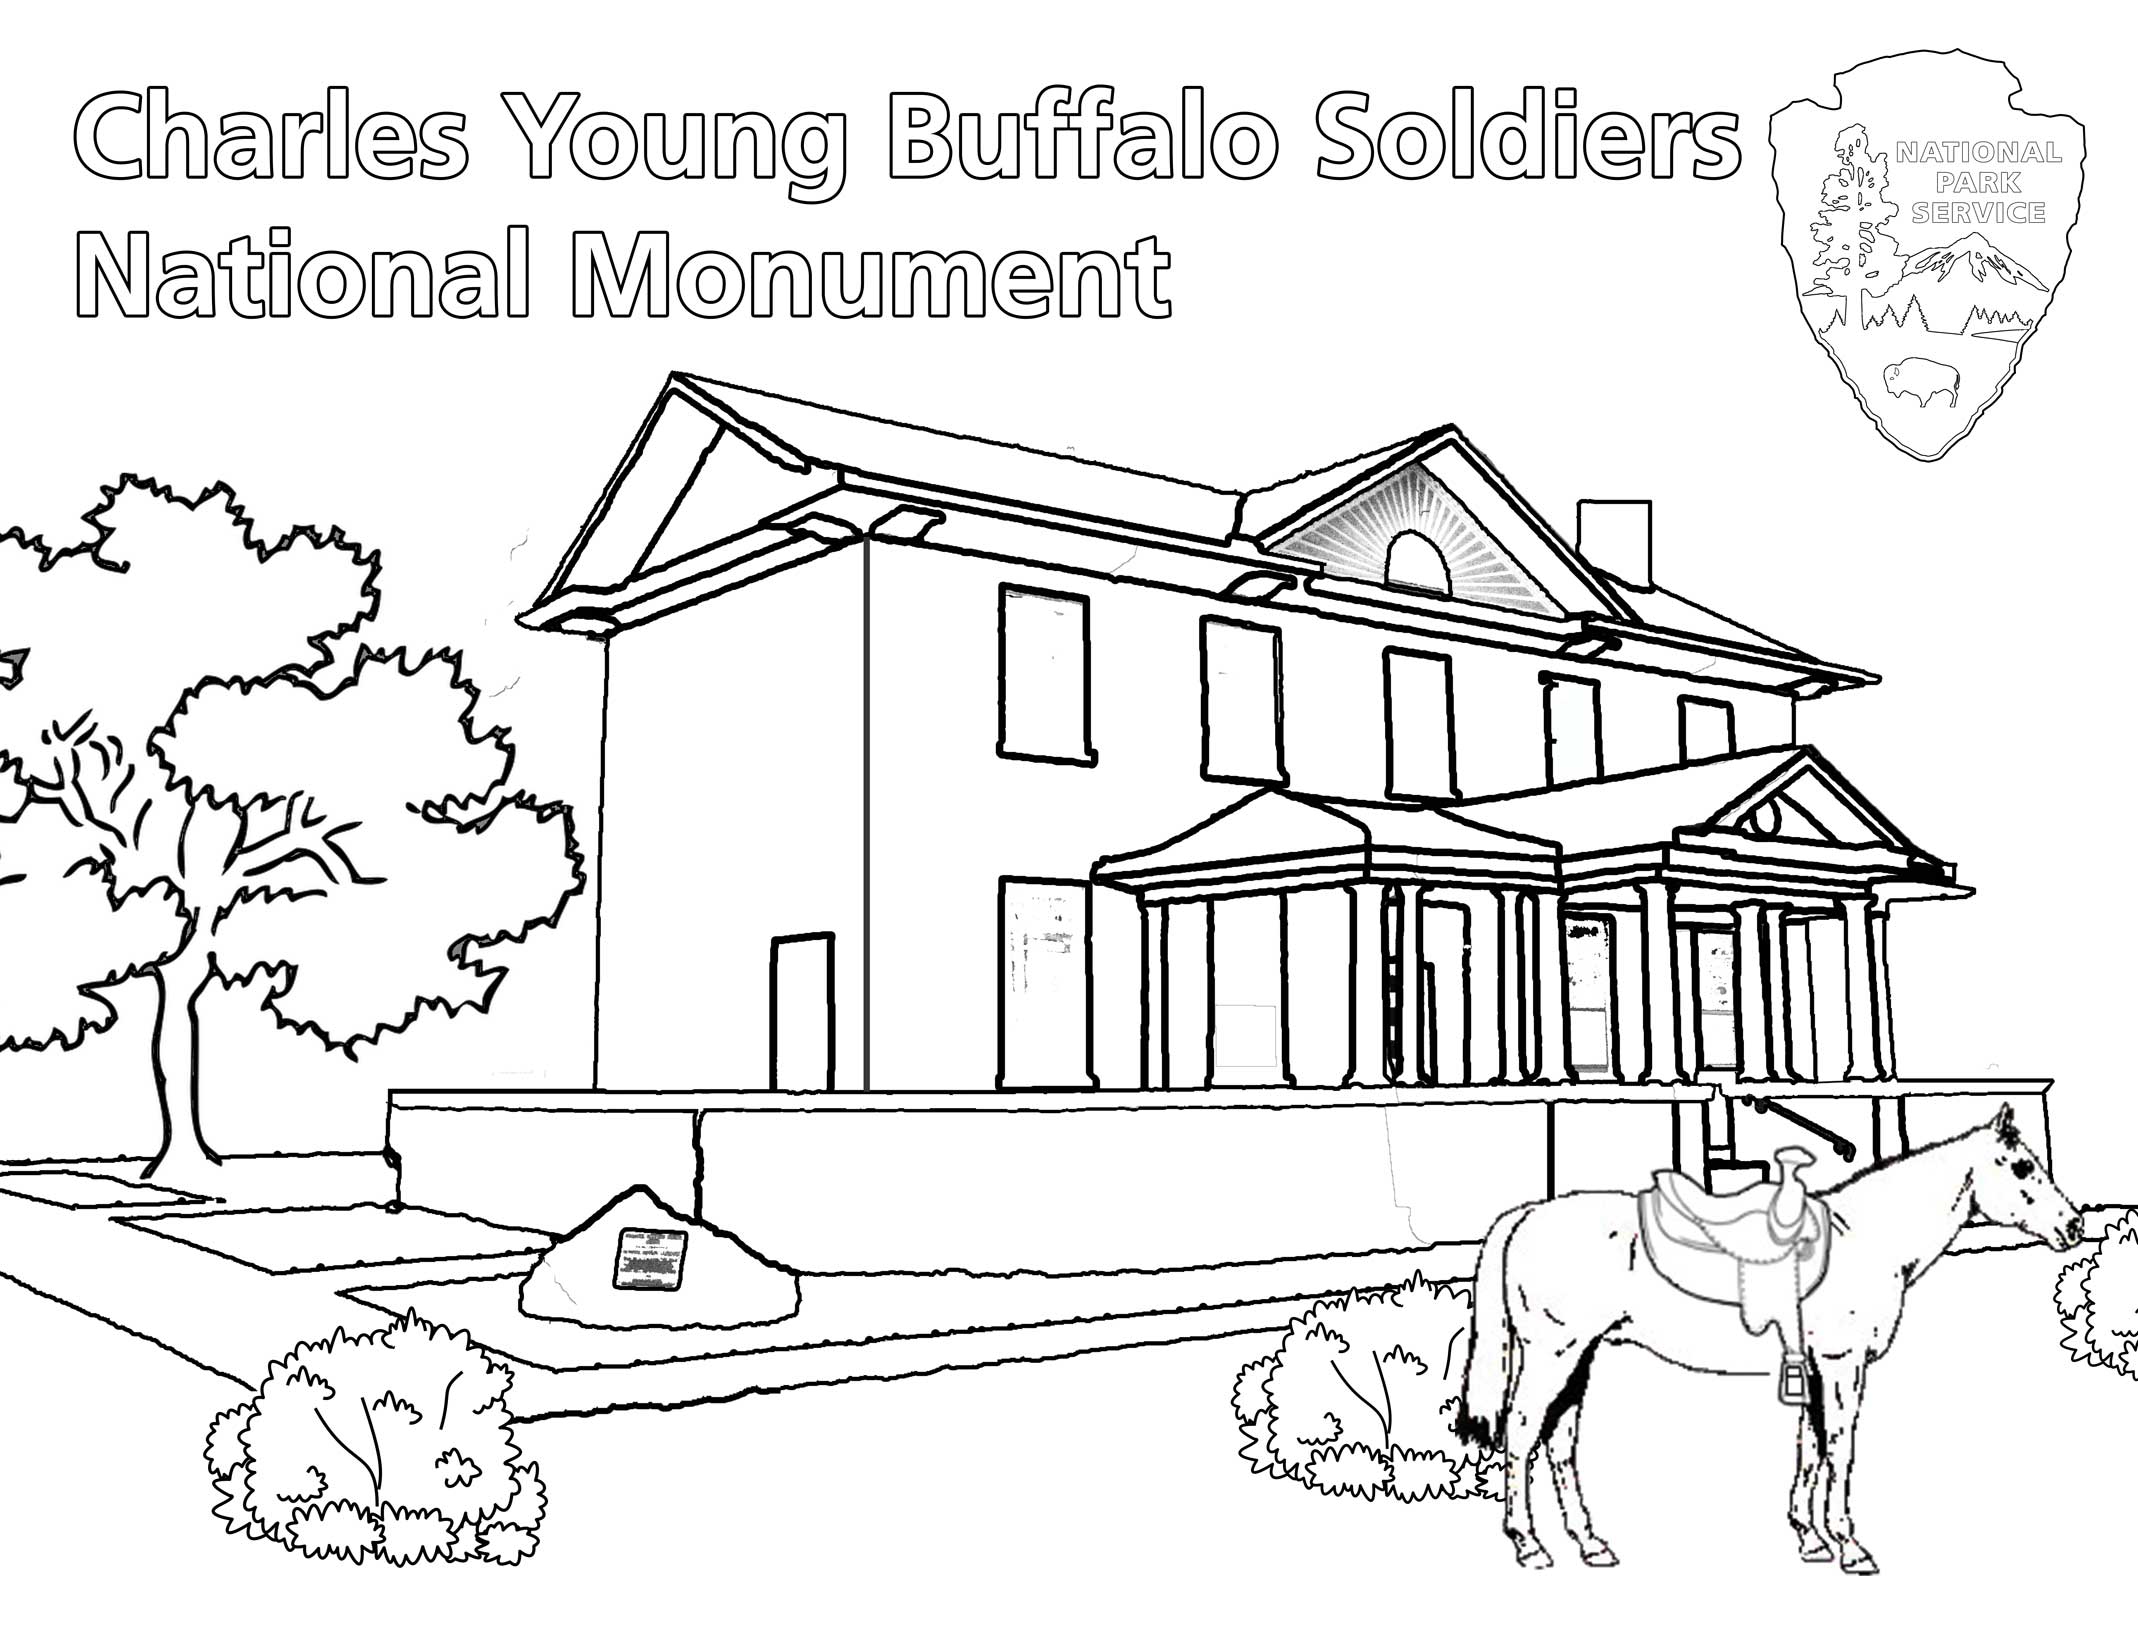 Charles Young Buffalo Soldiers Coloring Book - Charles ...